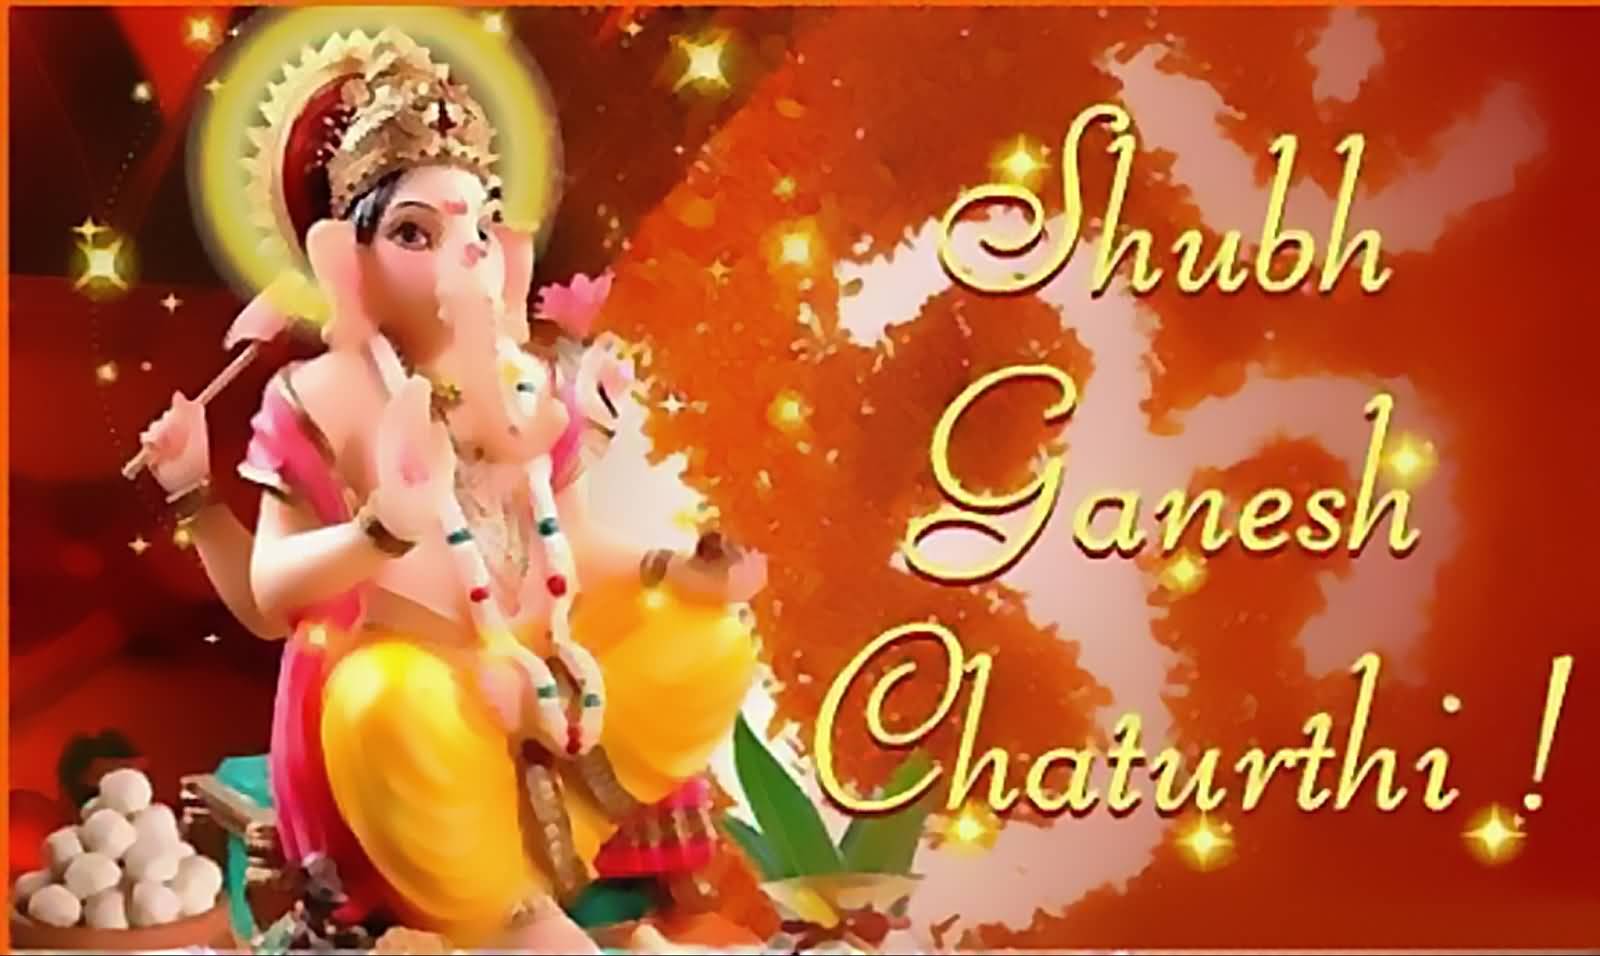 Shubh Ganesh Chaturthi Wishes For Facebook Friends